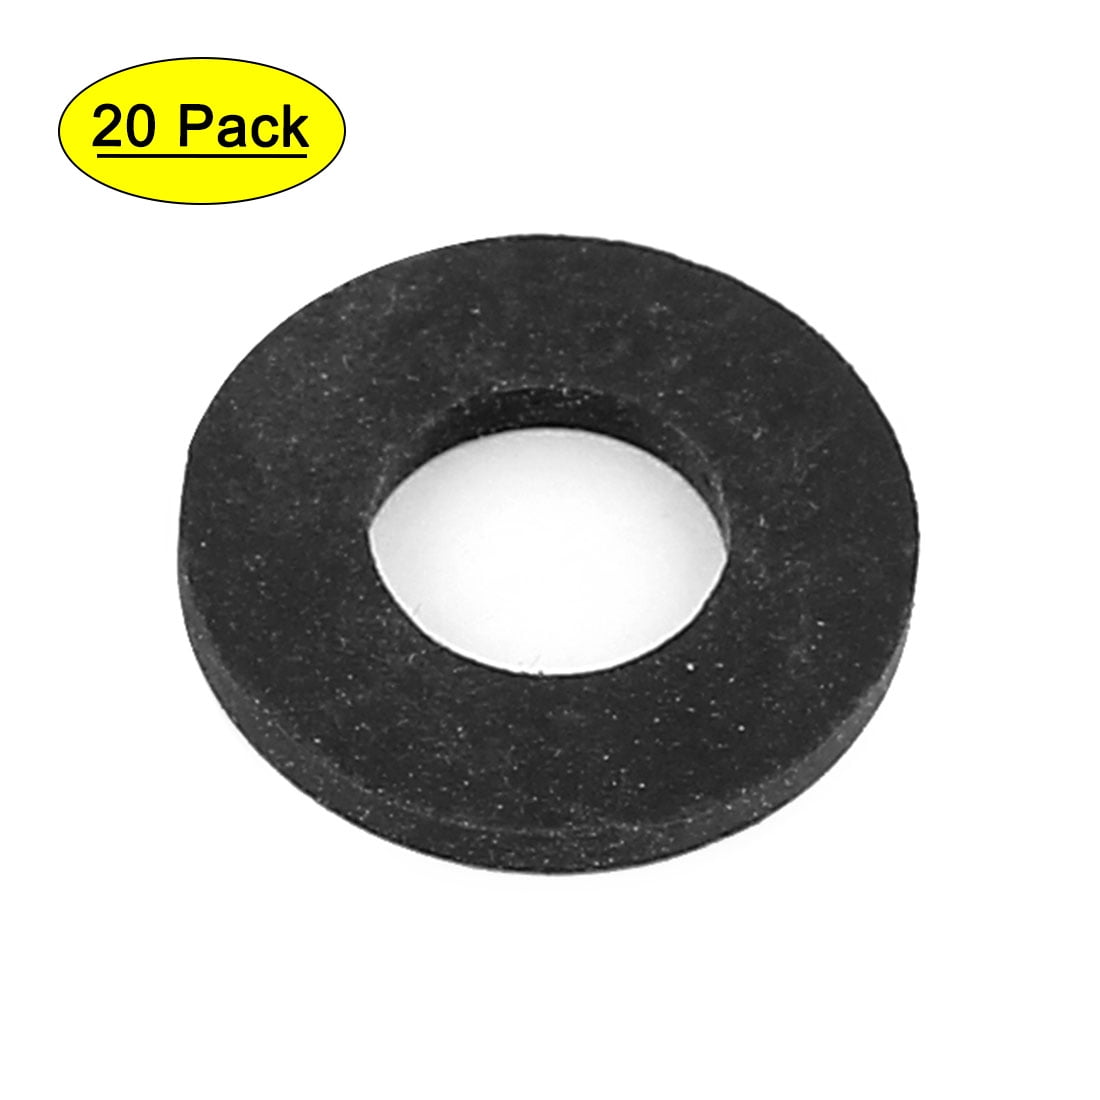 USA 100pcs Garden Pipe Water Shower Hose Washers Seal Faucet Fitting Ring Gasket 